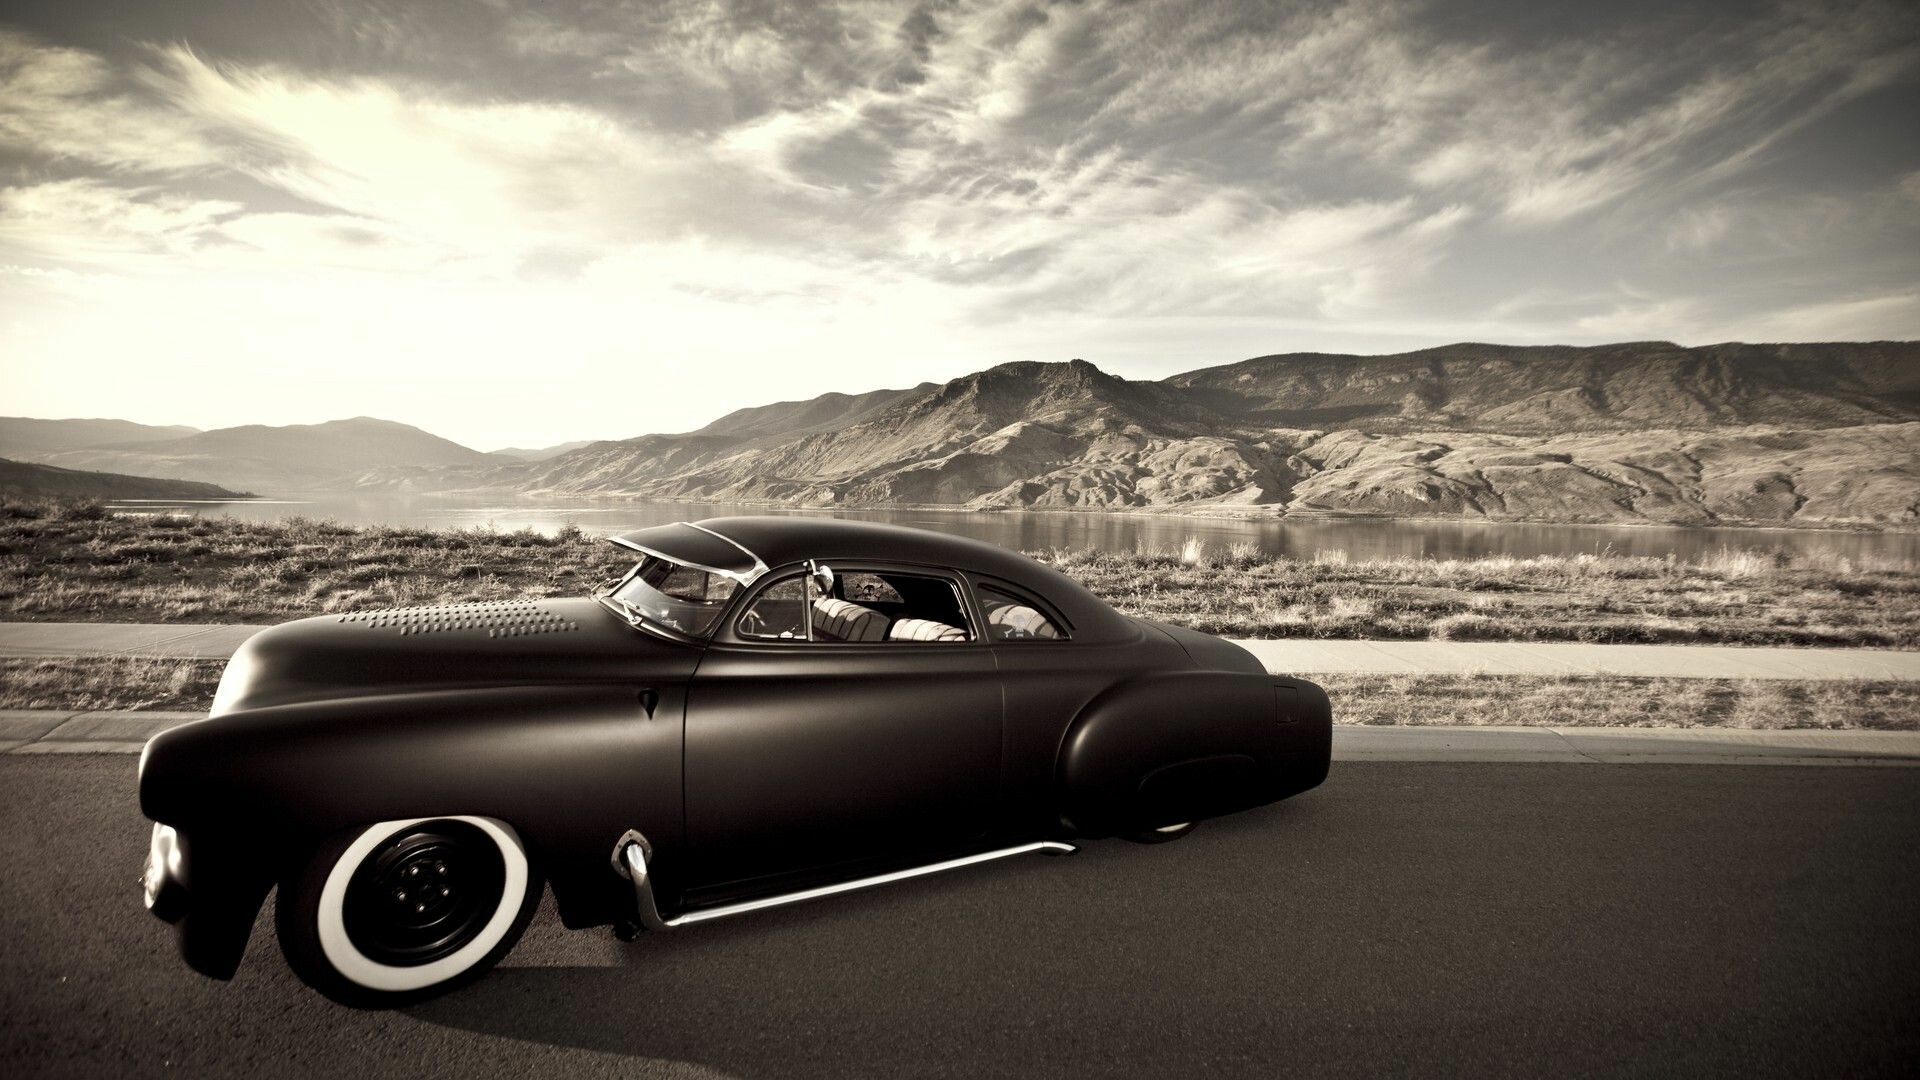 Hot Rod: Lowrider, A customized car with a lowered body. 1920x1080 Full HD Background.